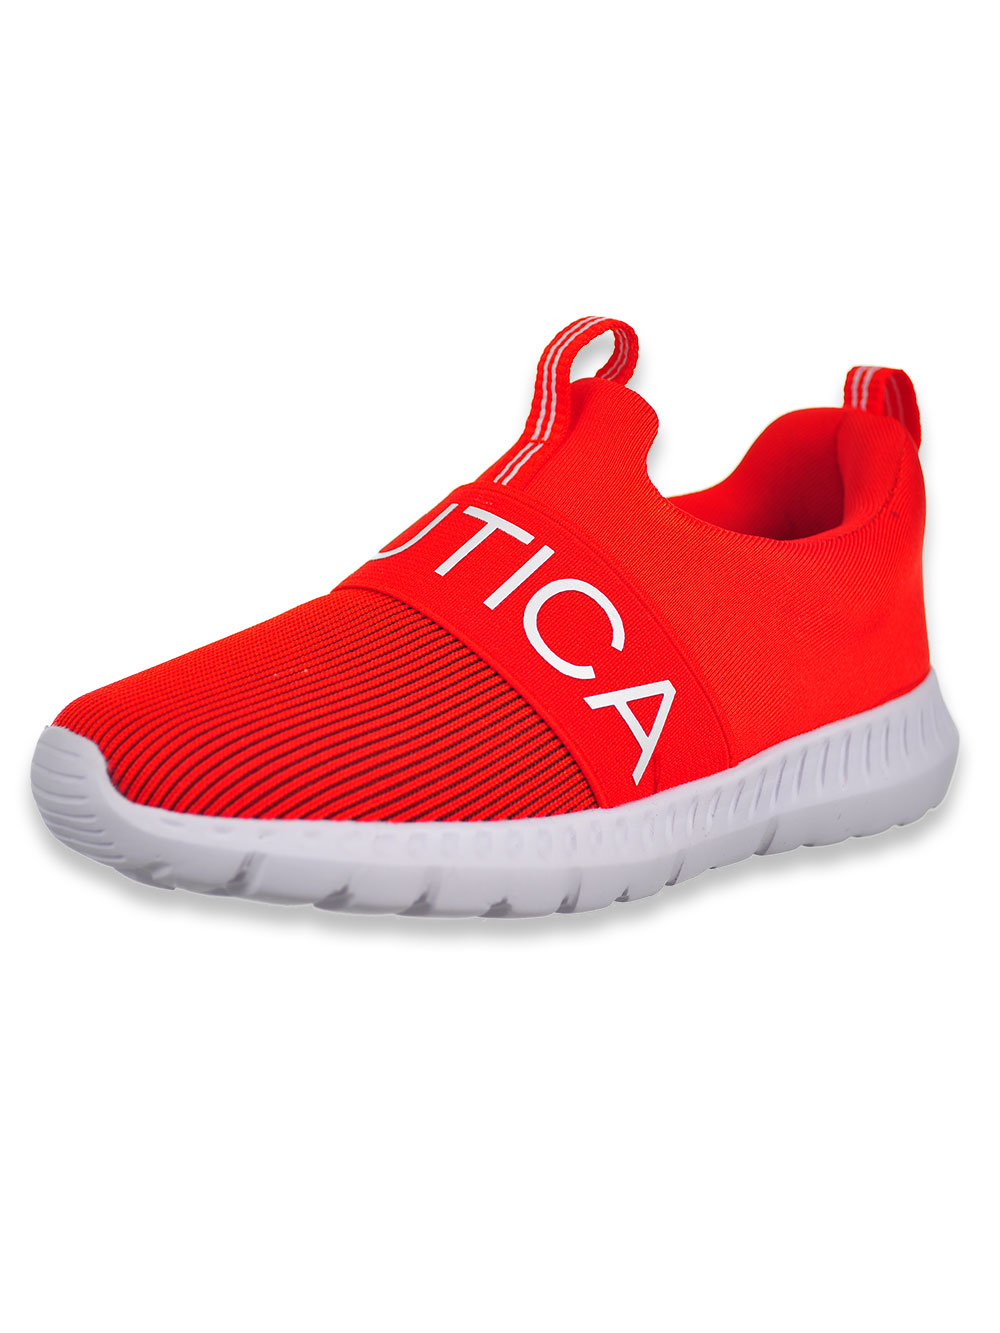 nautica red shoes